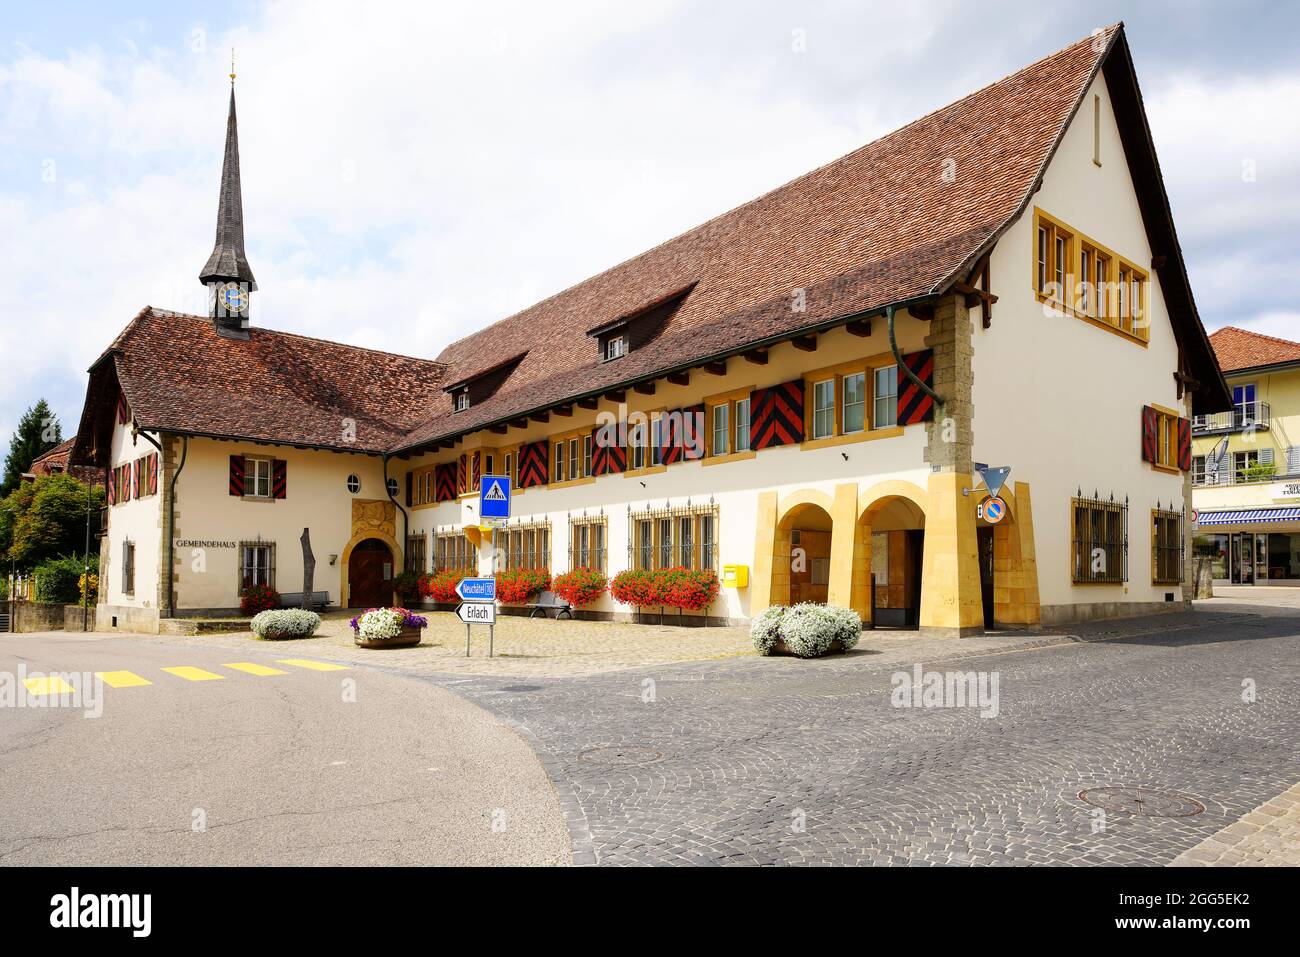 Picturesque Town Hall (Gemaindehaus) in Ins. Ins is the municipality in the Bern region and is a local administrative unit. ruled by a mayor. pictures Stock Photo